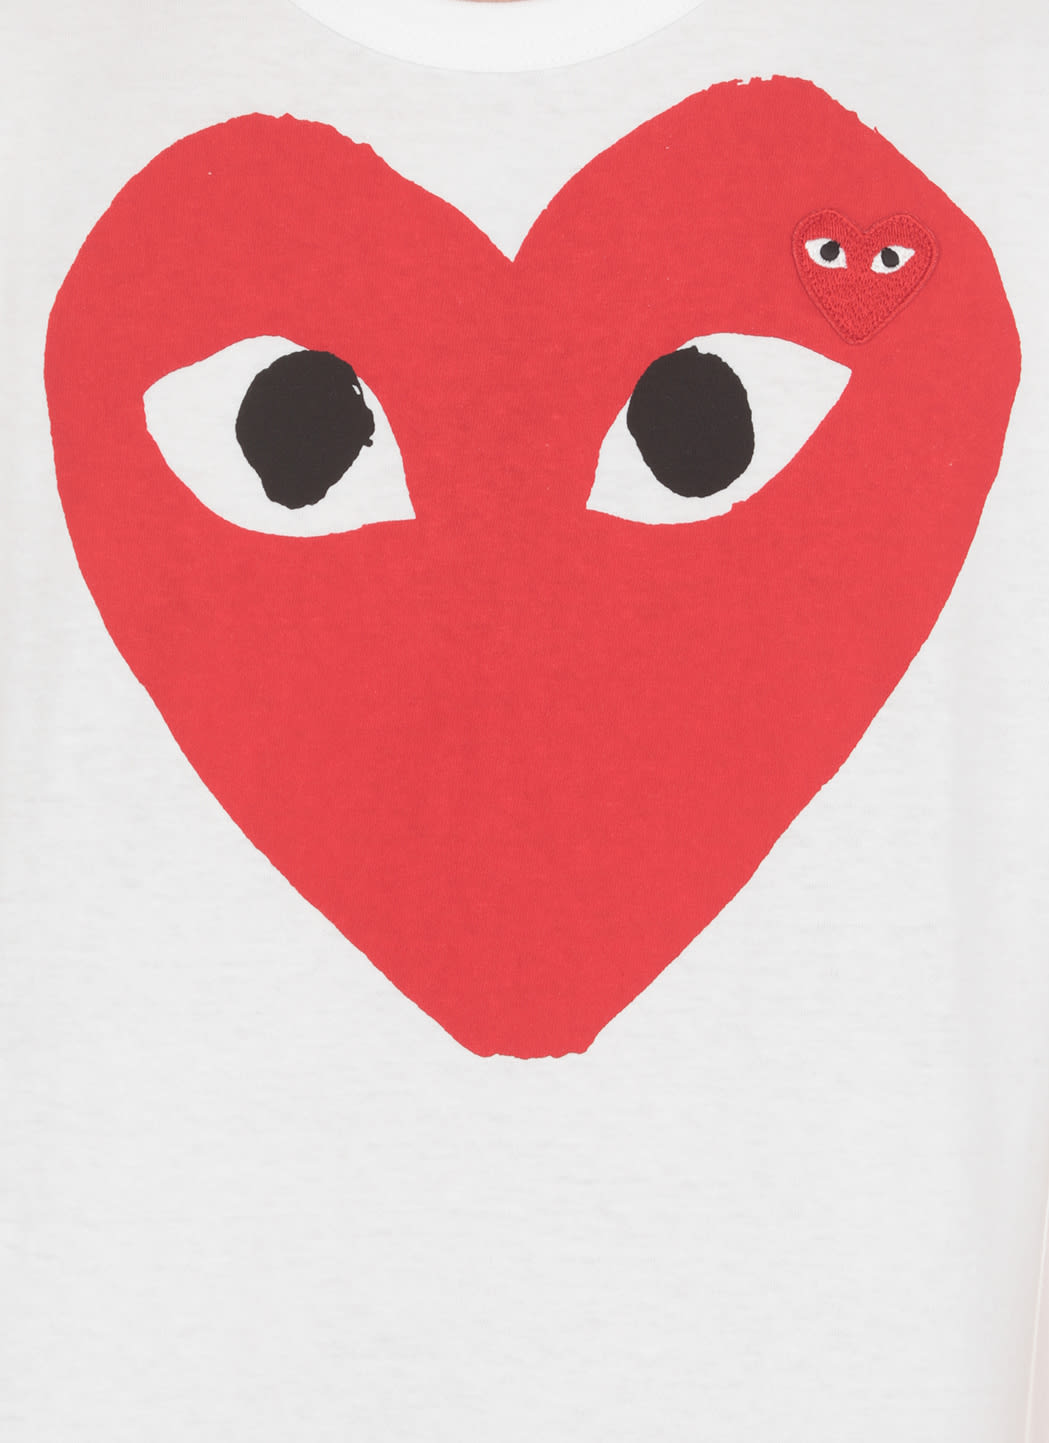 Shop Comme Des Garçons Play T-shirt With Logo In White